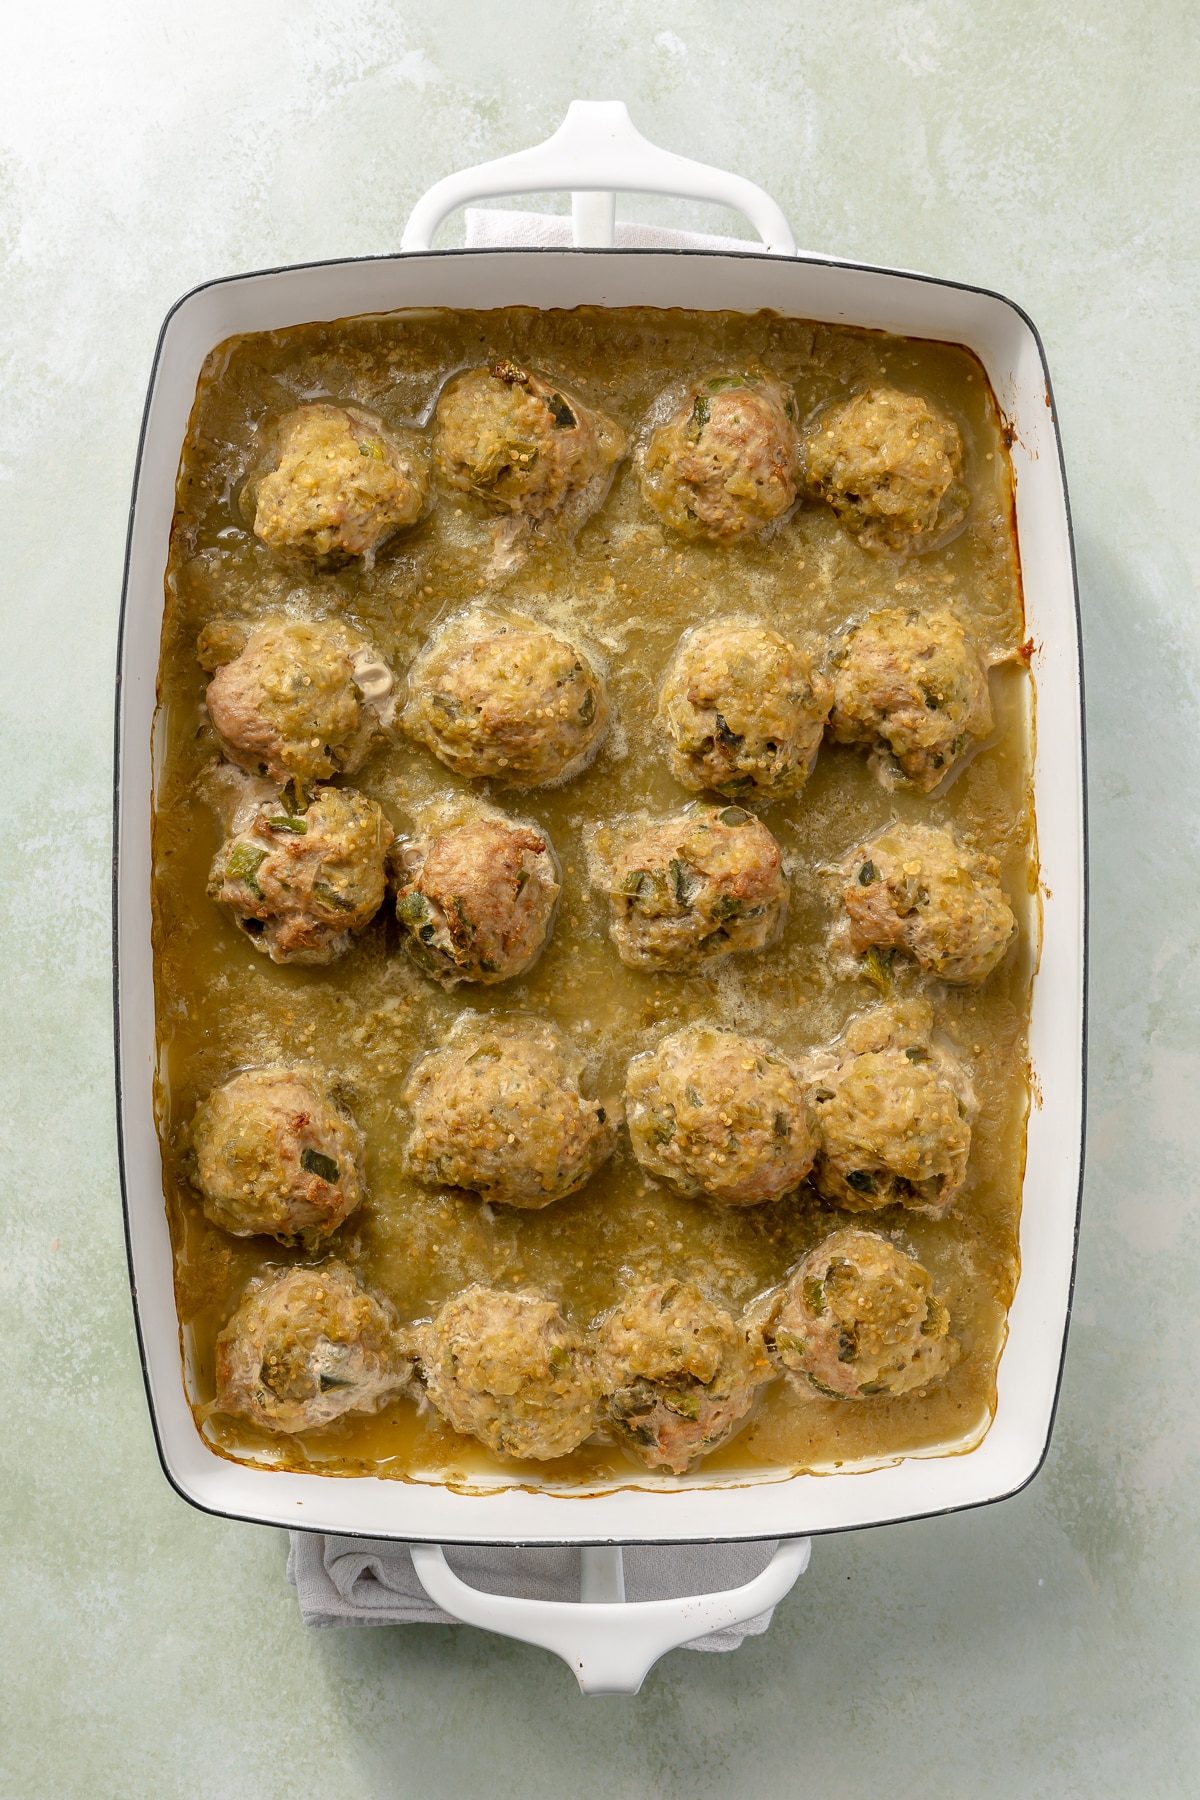 A green sauce has been poured over the top. of the meatballs.